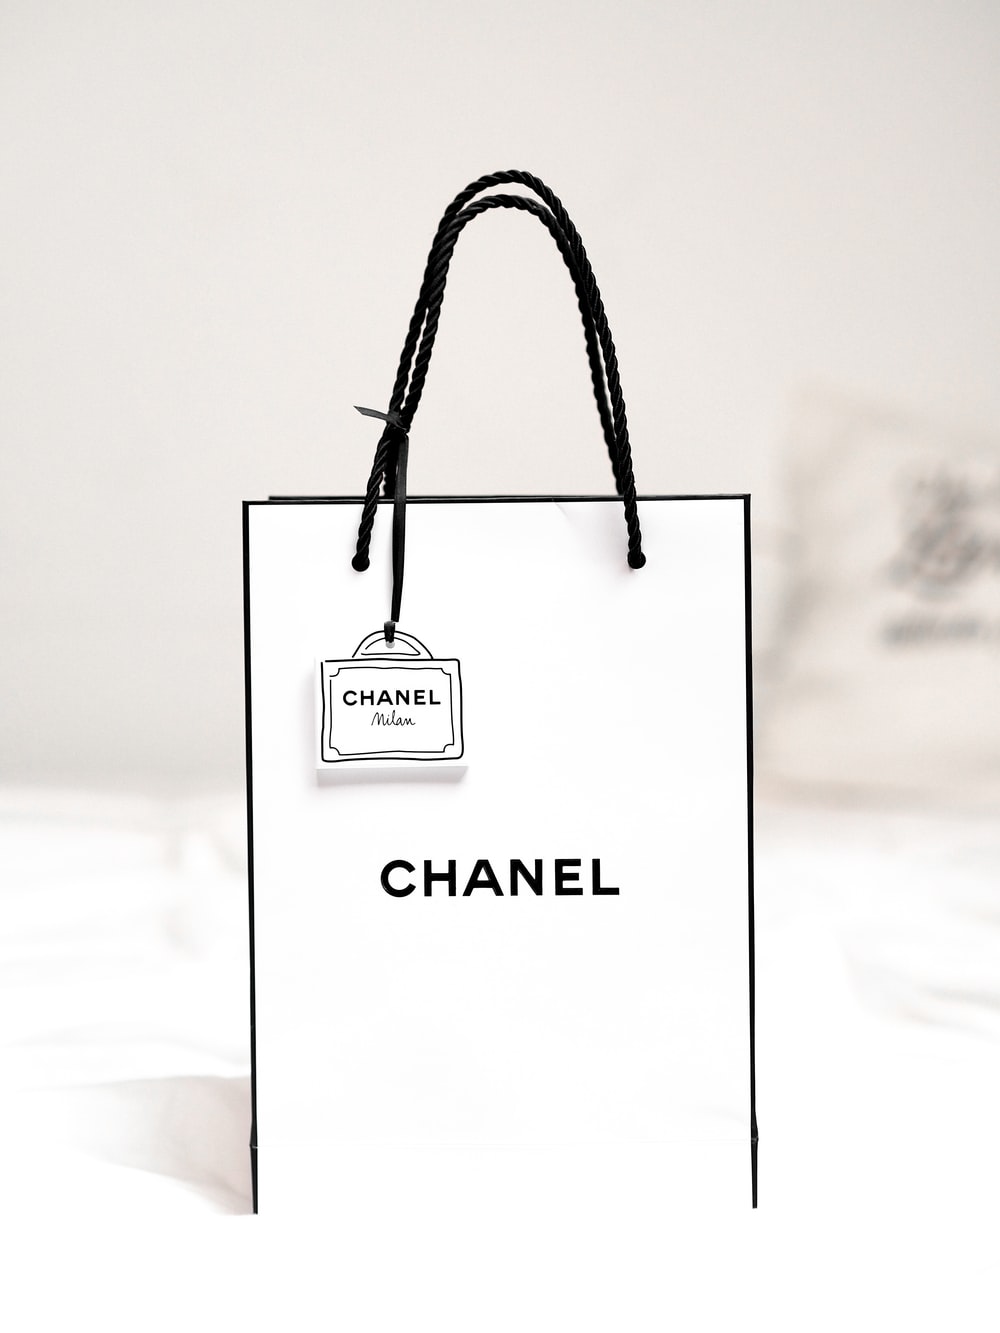 Chanel Bag Picture. Download Free Image